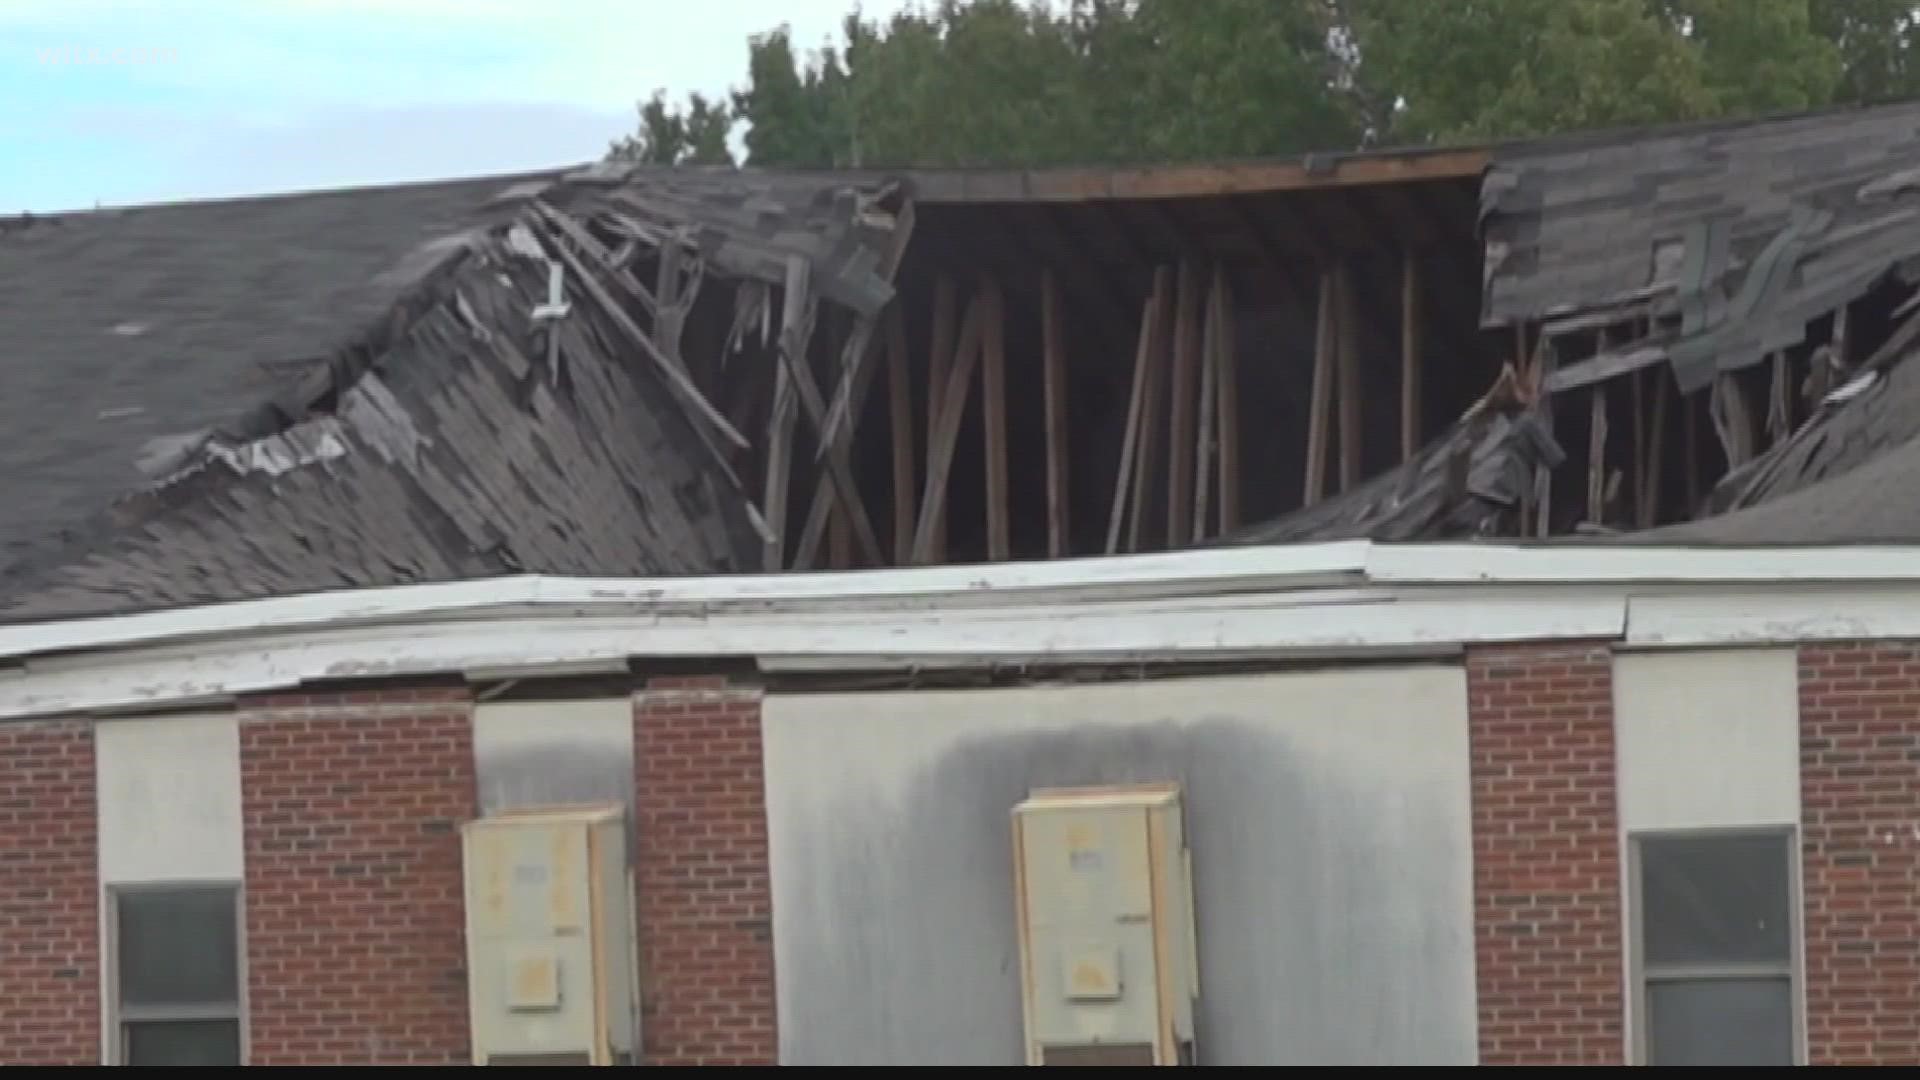 Plans were announced Thursday to remove a gaping hole in the roof of a Lee County school that raised safety concerns for some parents and community members.